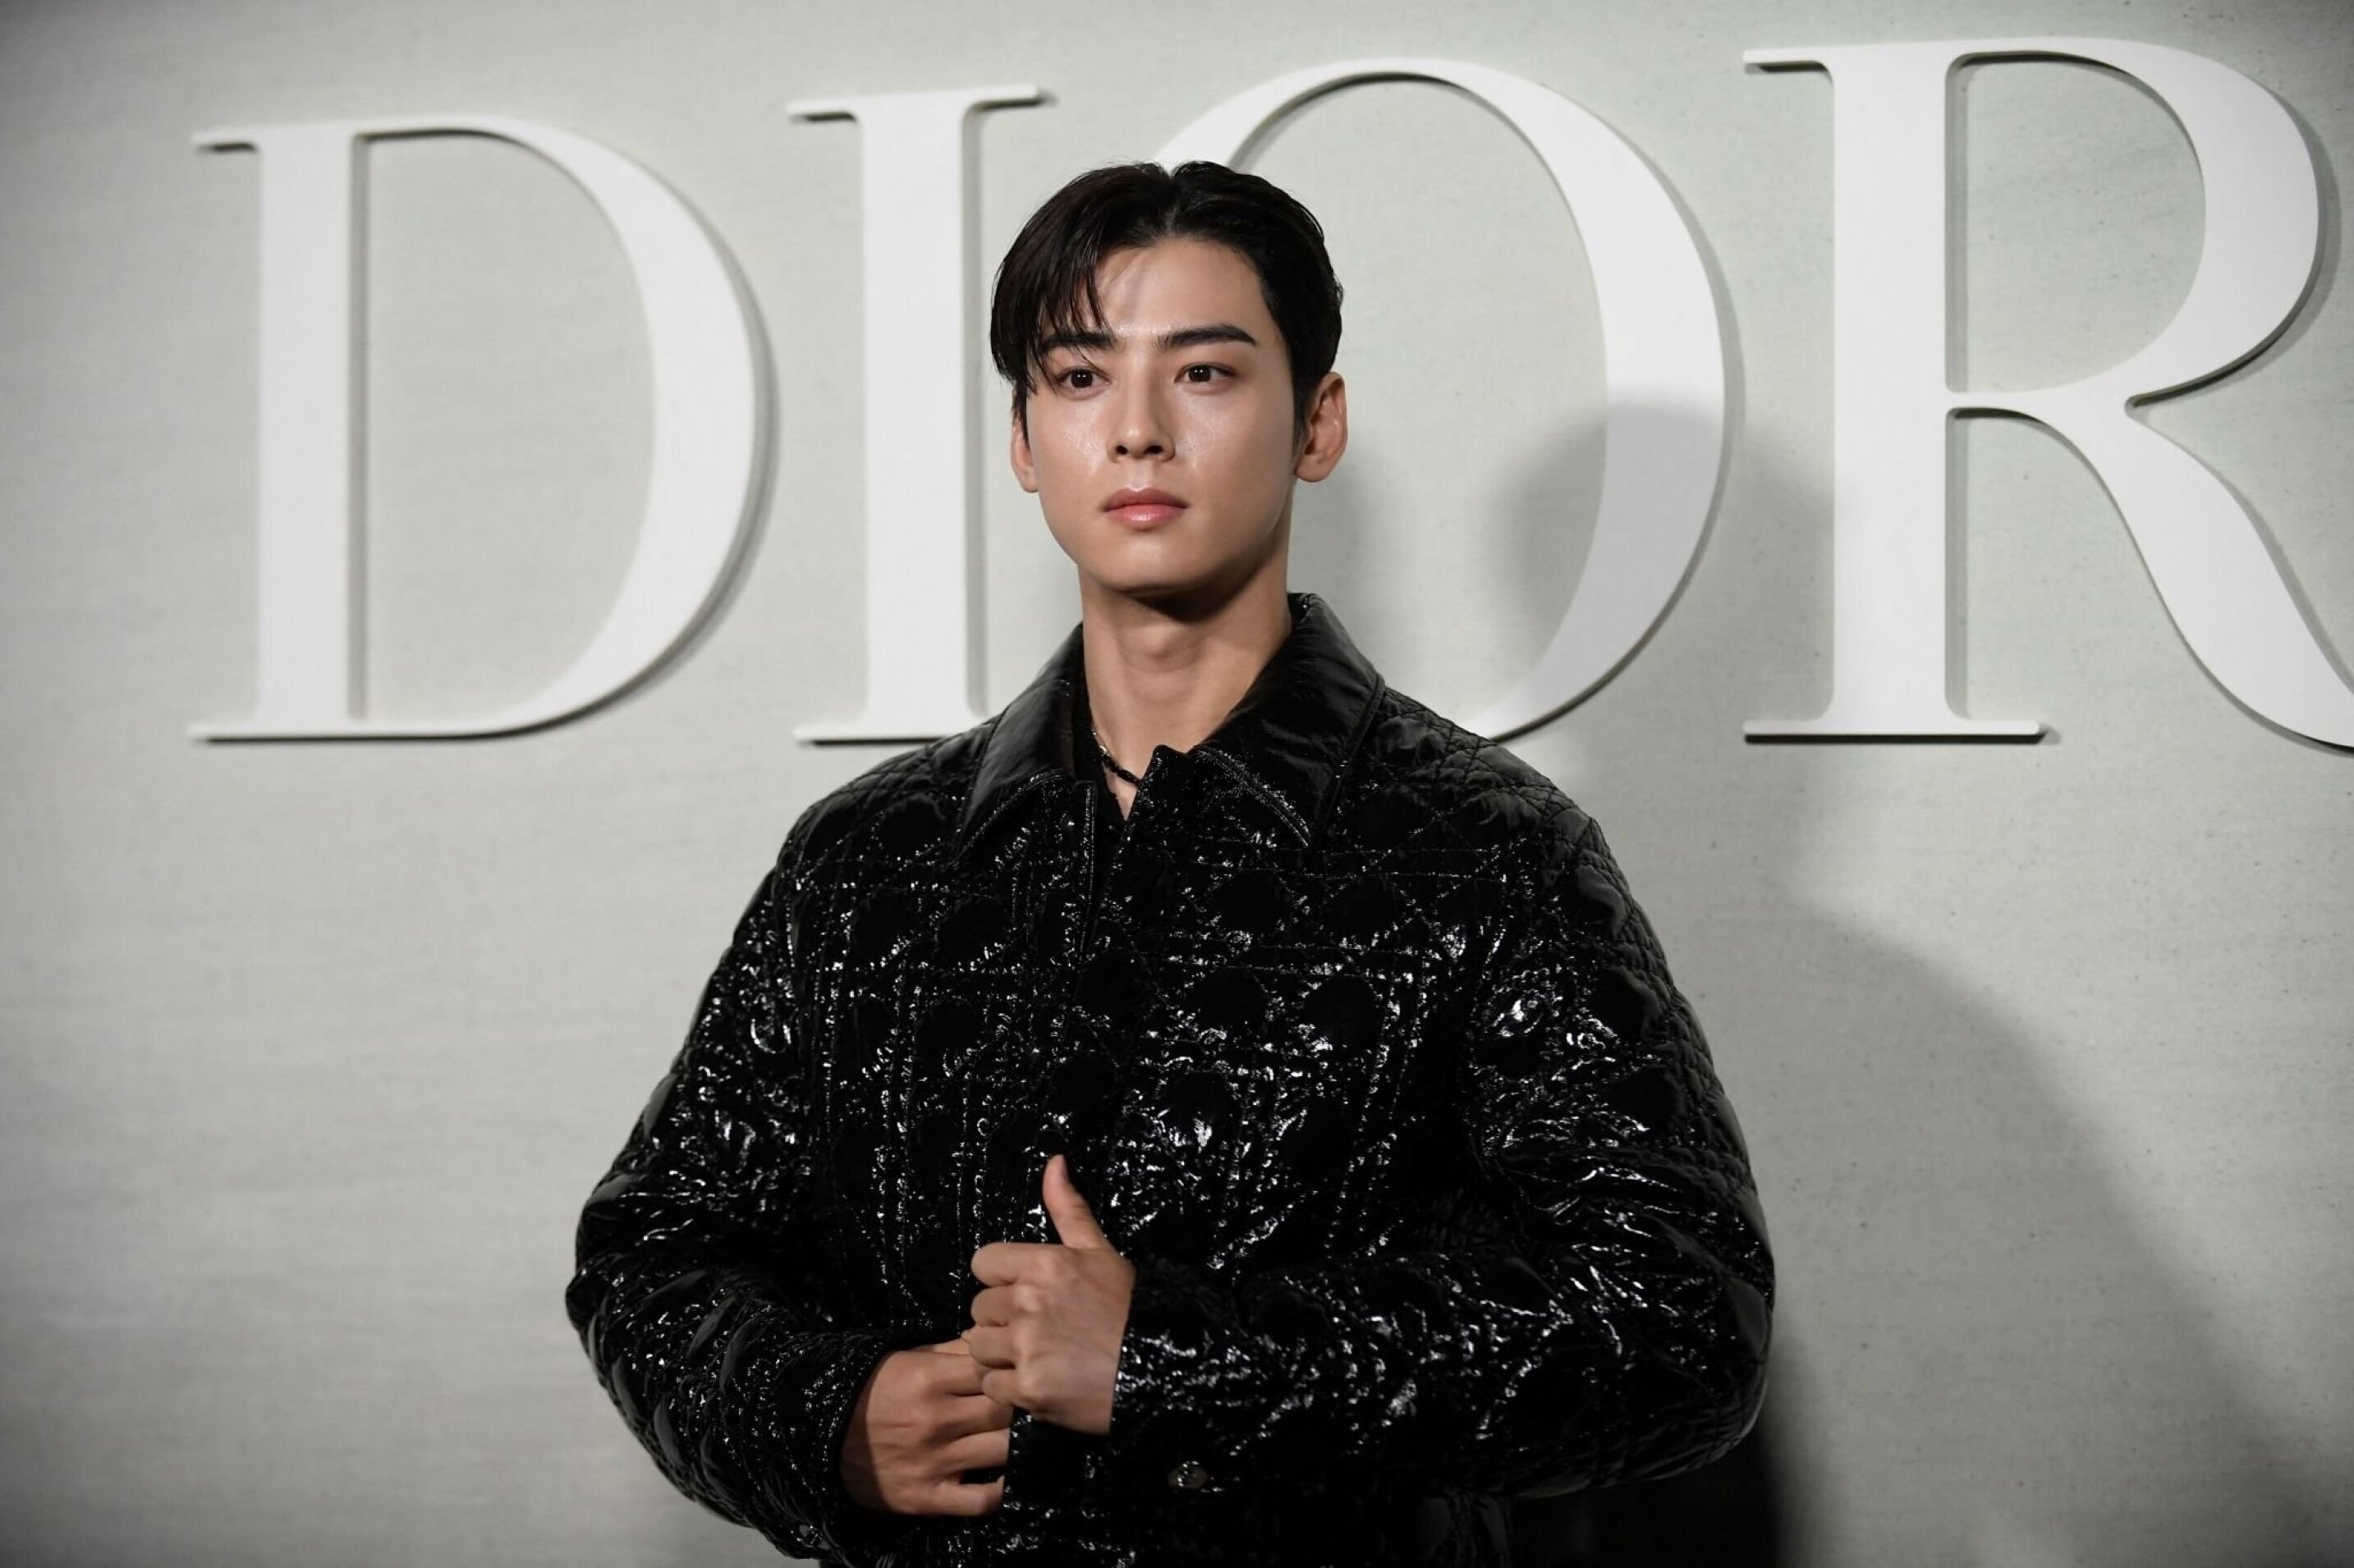 Cha Eun-woo will be in Singapore on 14 June 2023 for Dior's event